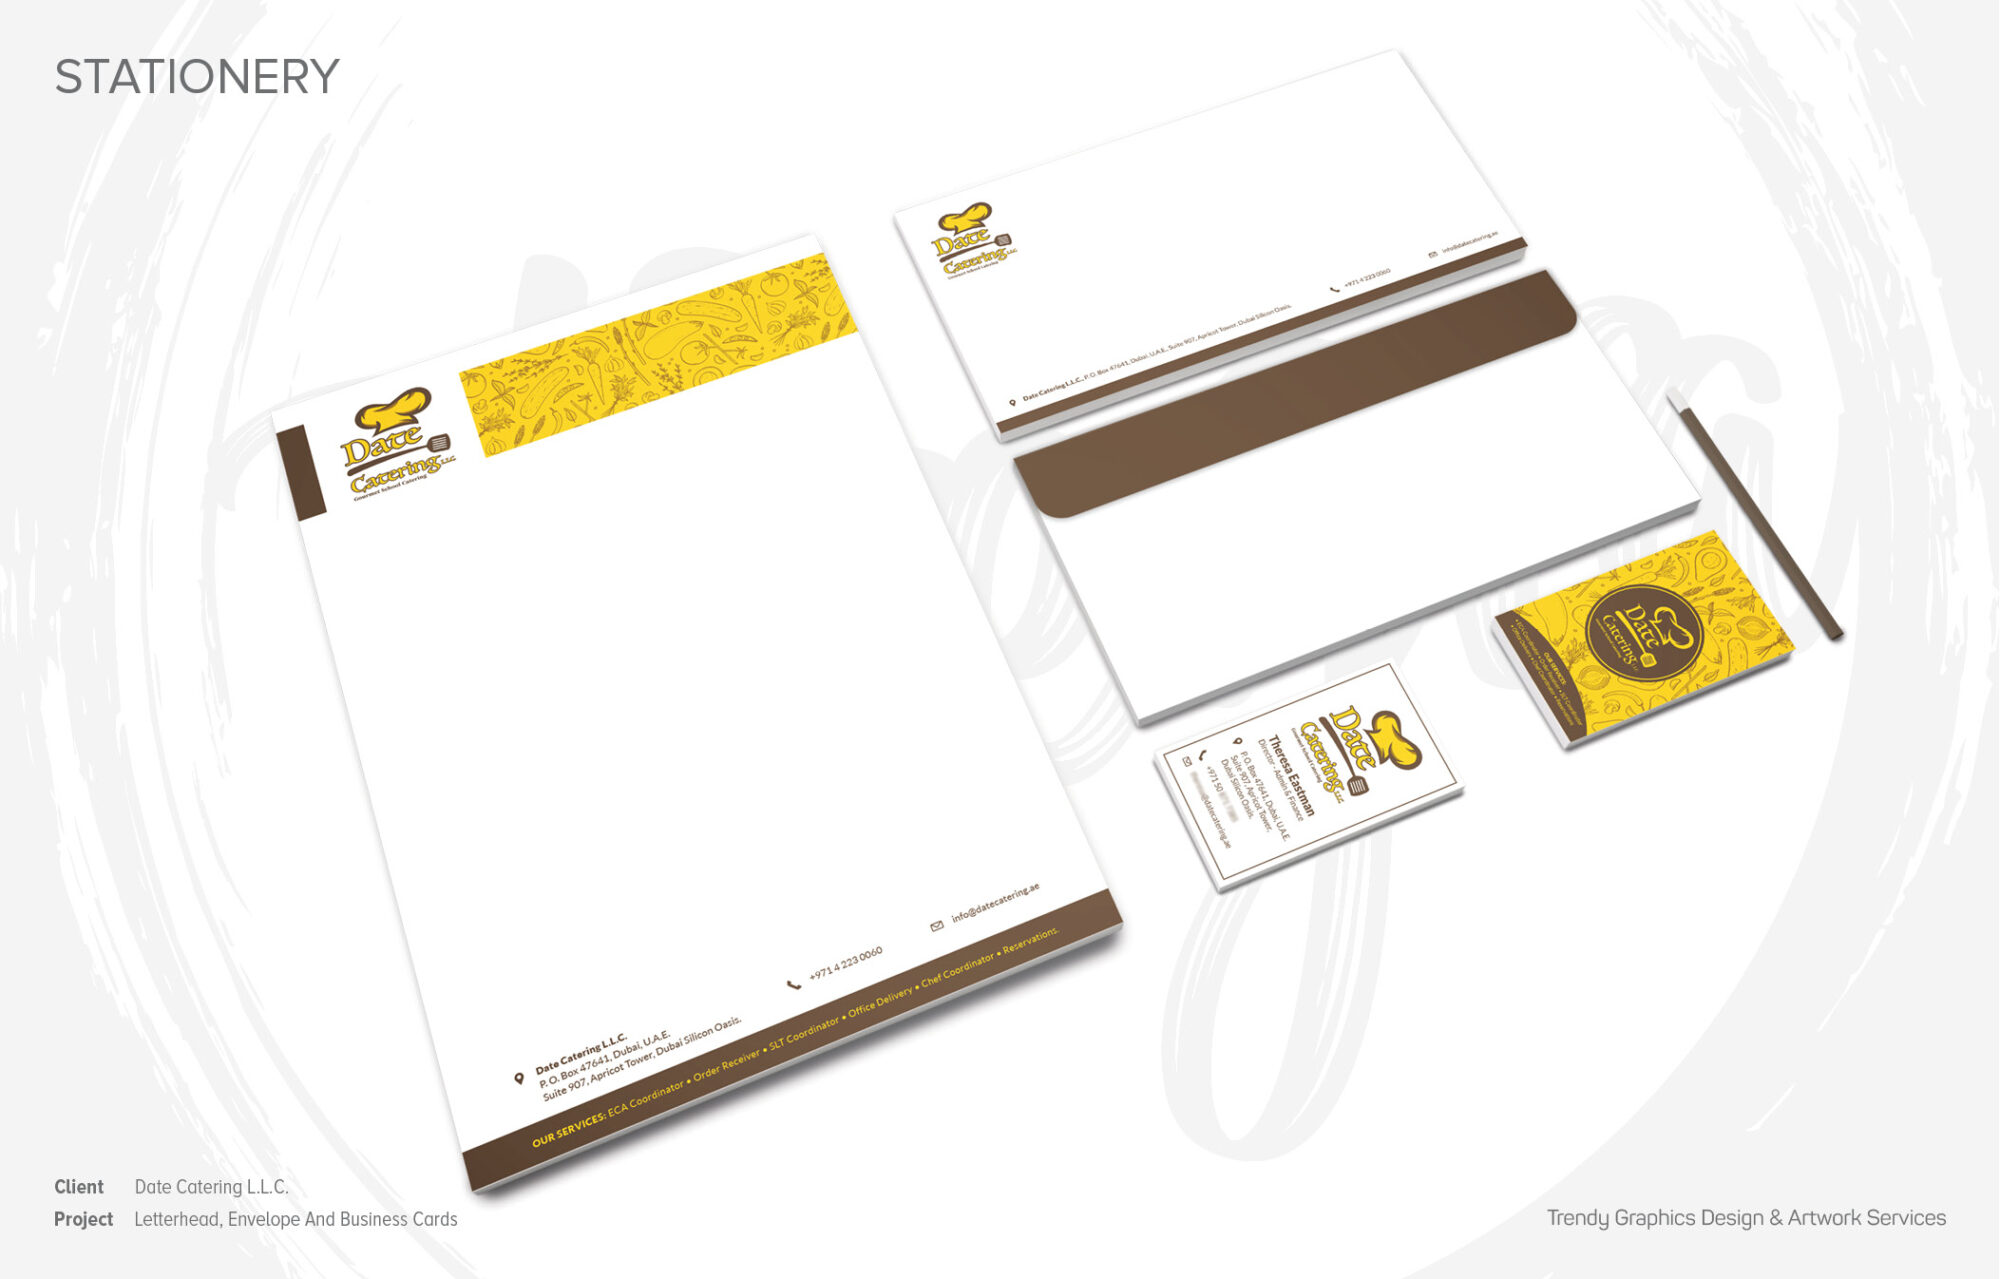 Date Catering L.L.C. – Letterhead, Envelope and Business Cards